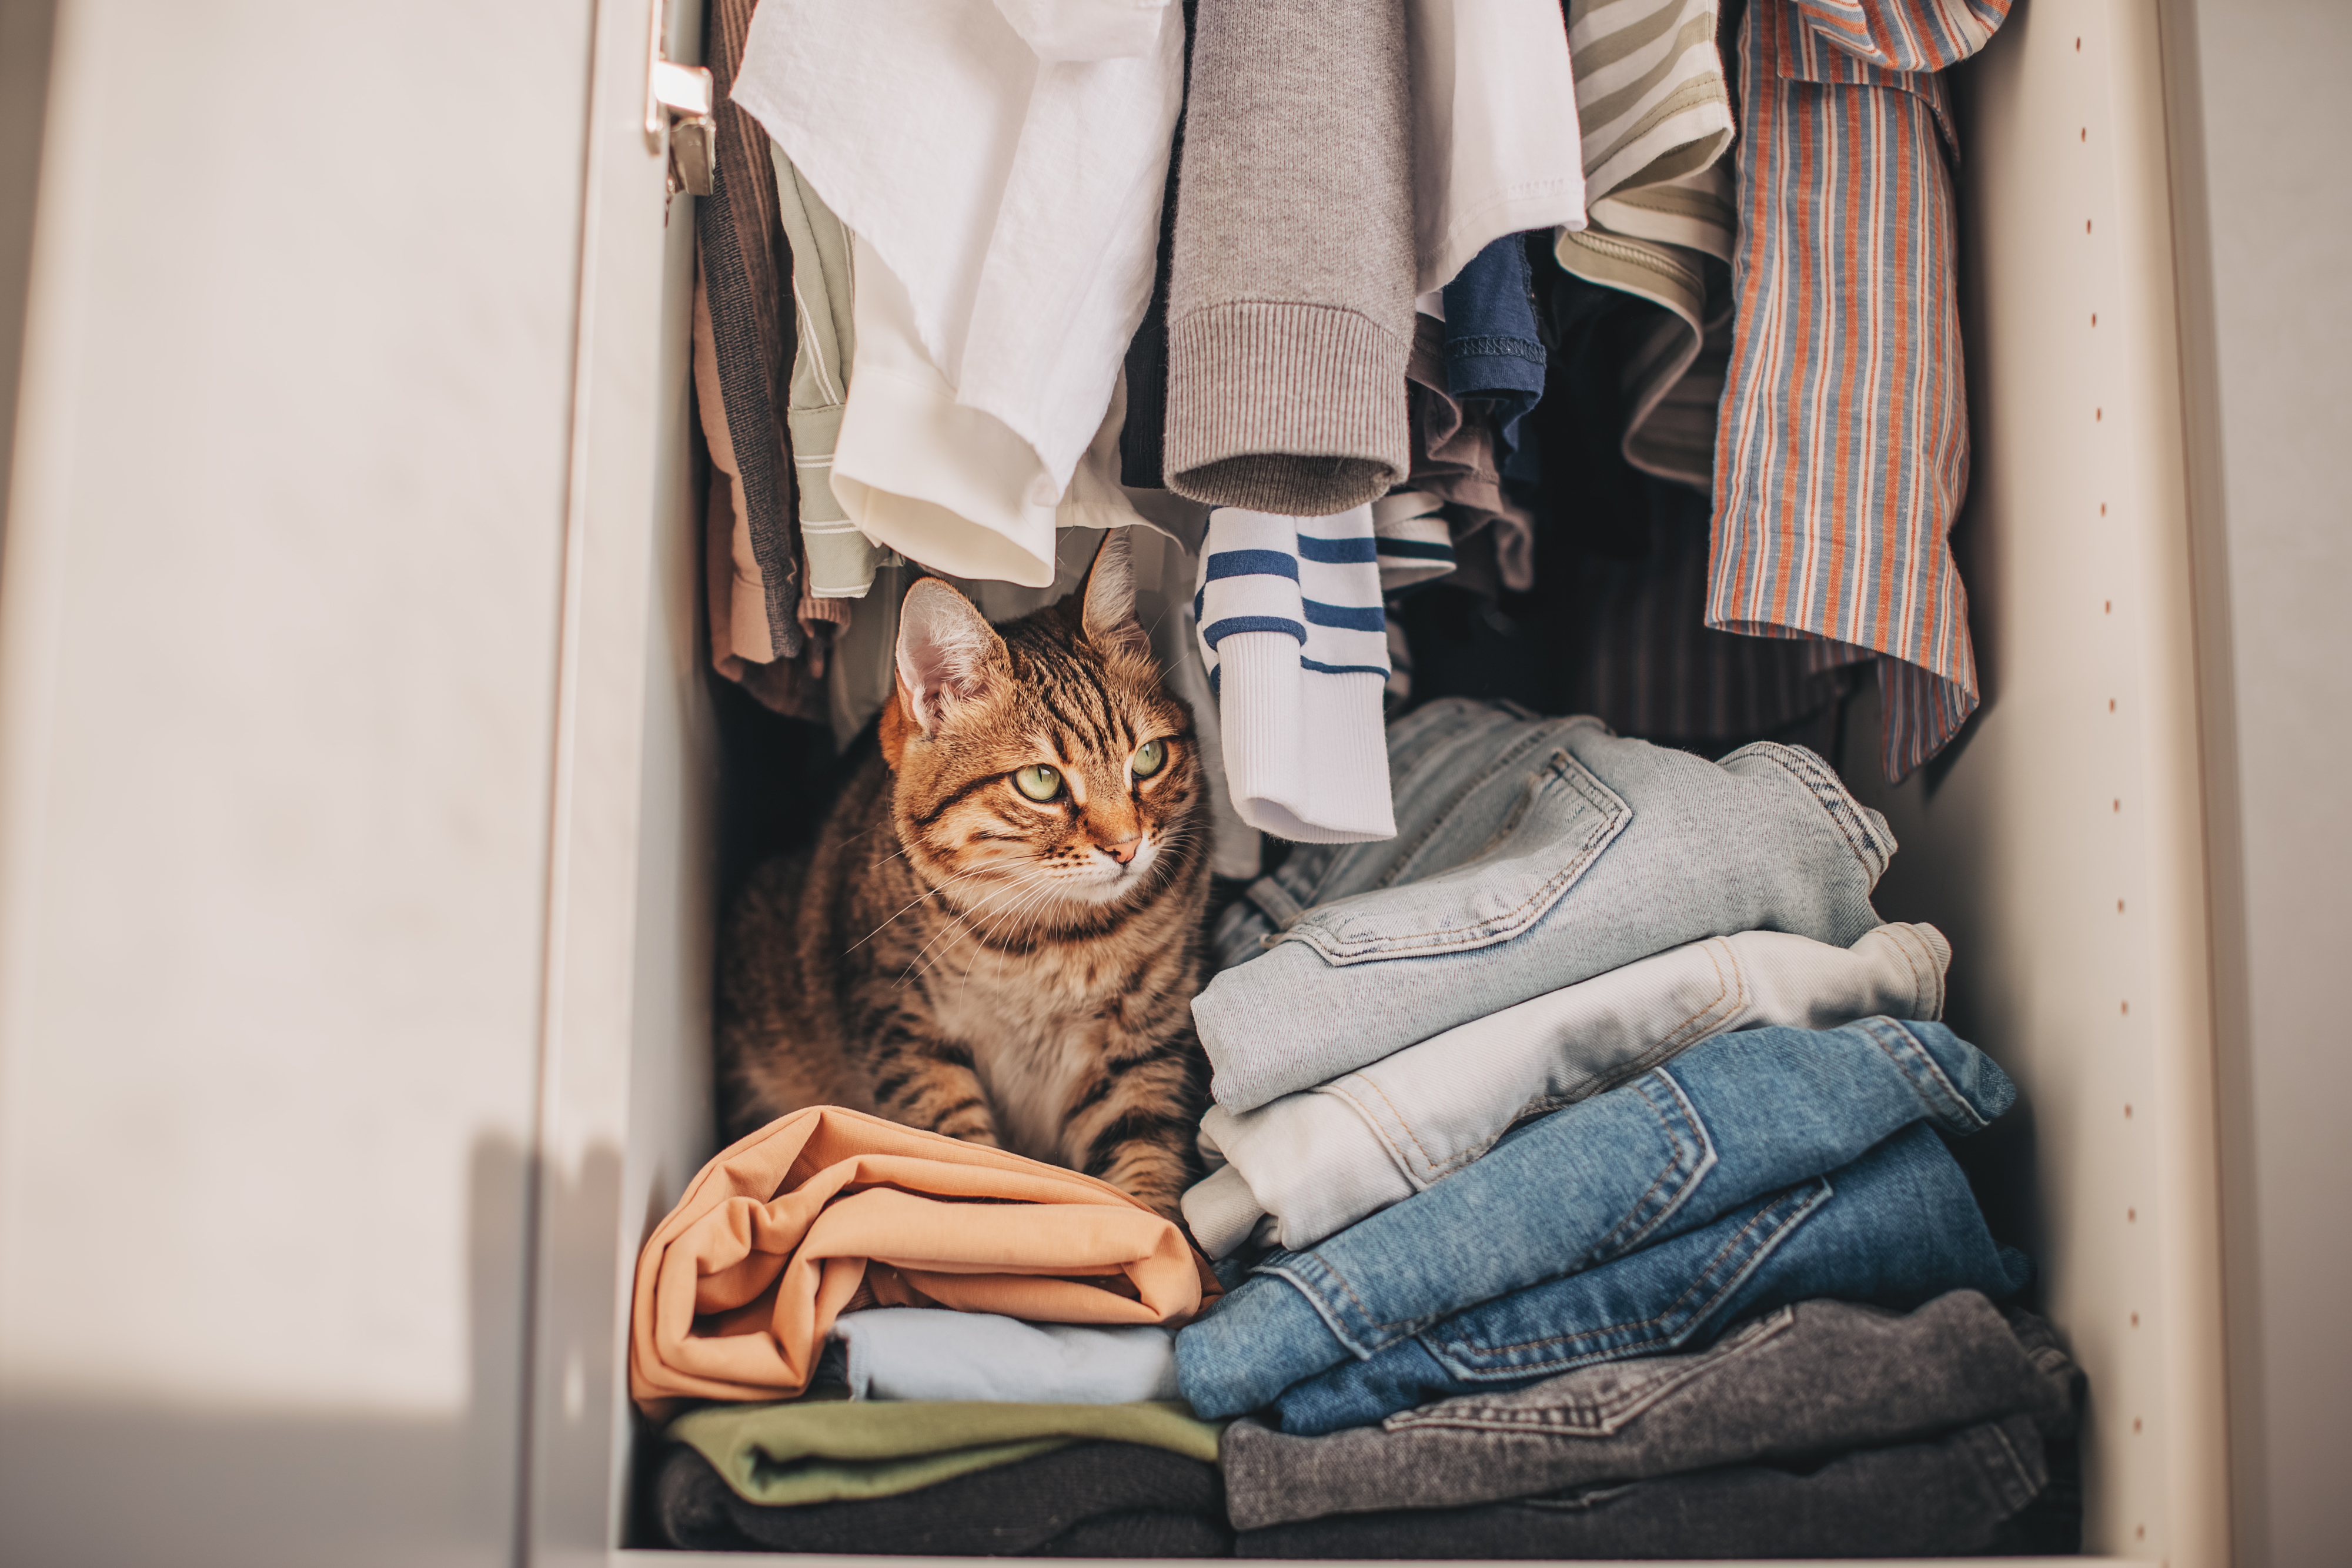 A cat sitting in a closet with clothing